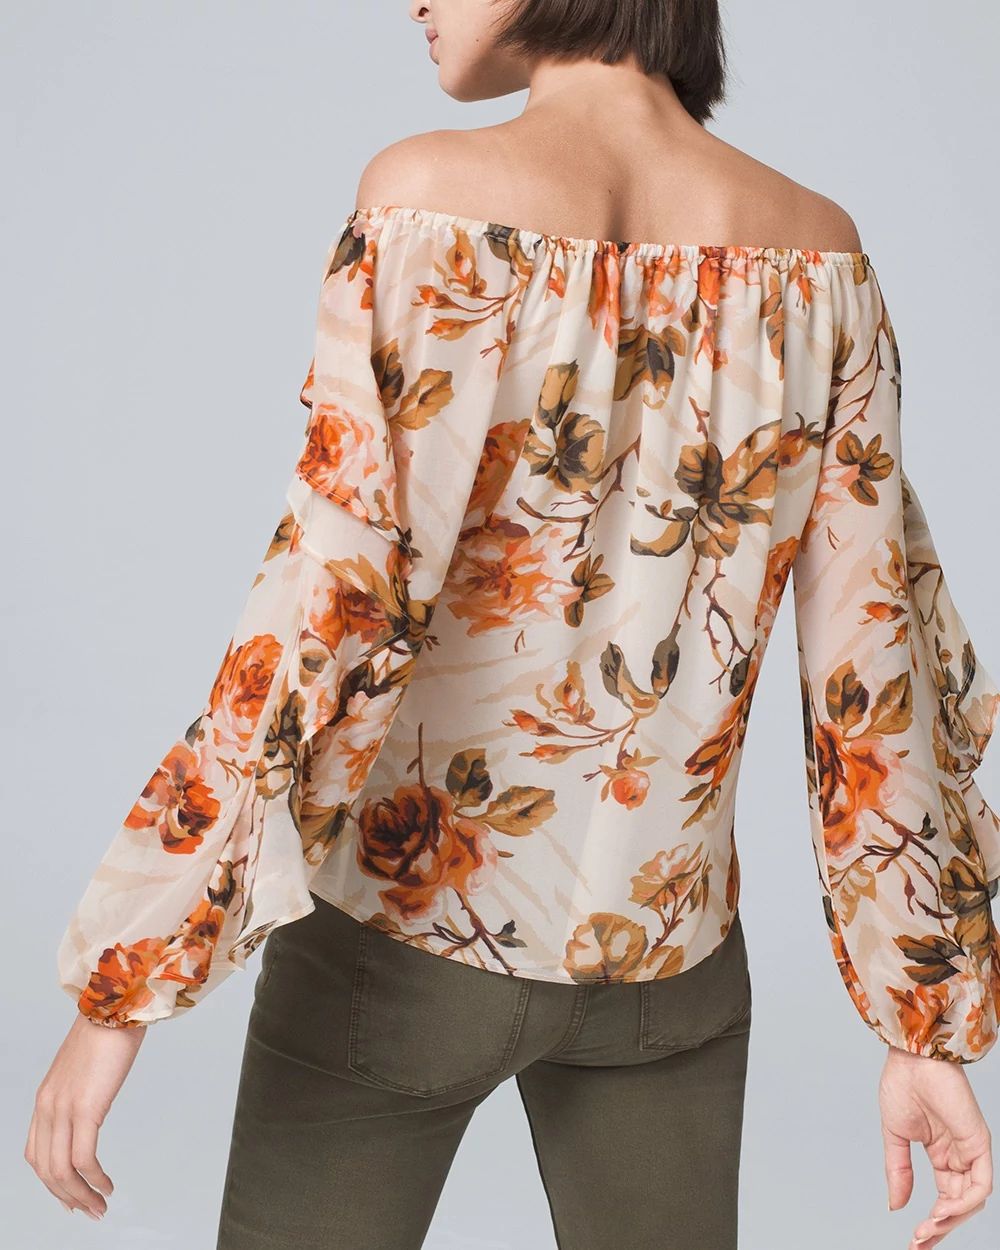 FLORAL-PRINT OFF-THE-SHOULDER BLOUSE click to view larger image.